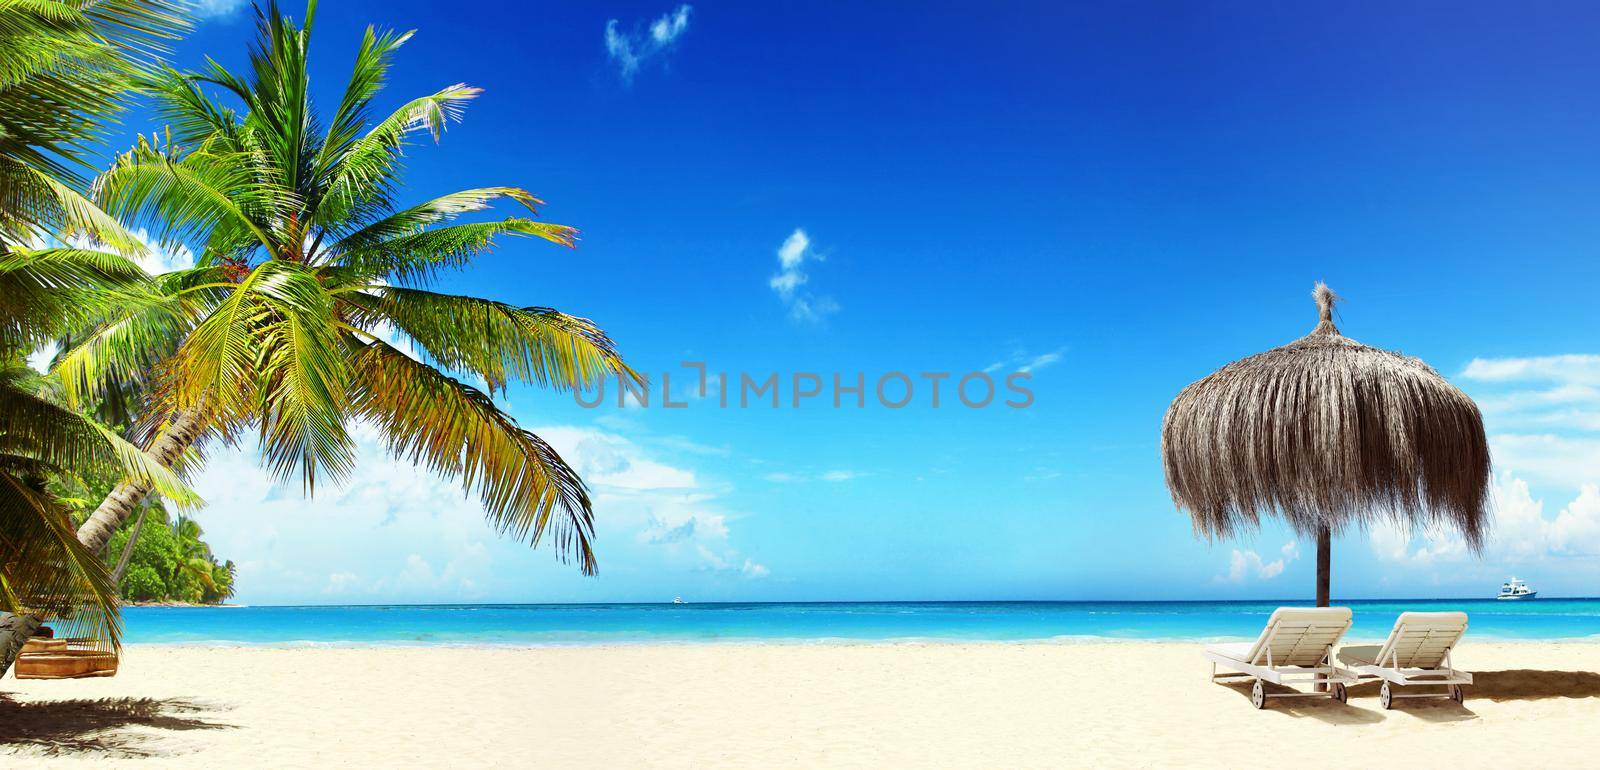 Wooden deck chairs on sandy beach near sea. Holiday background.